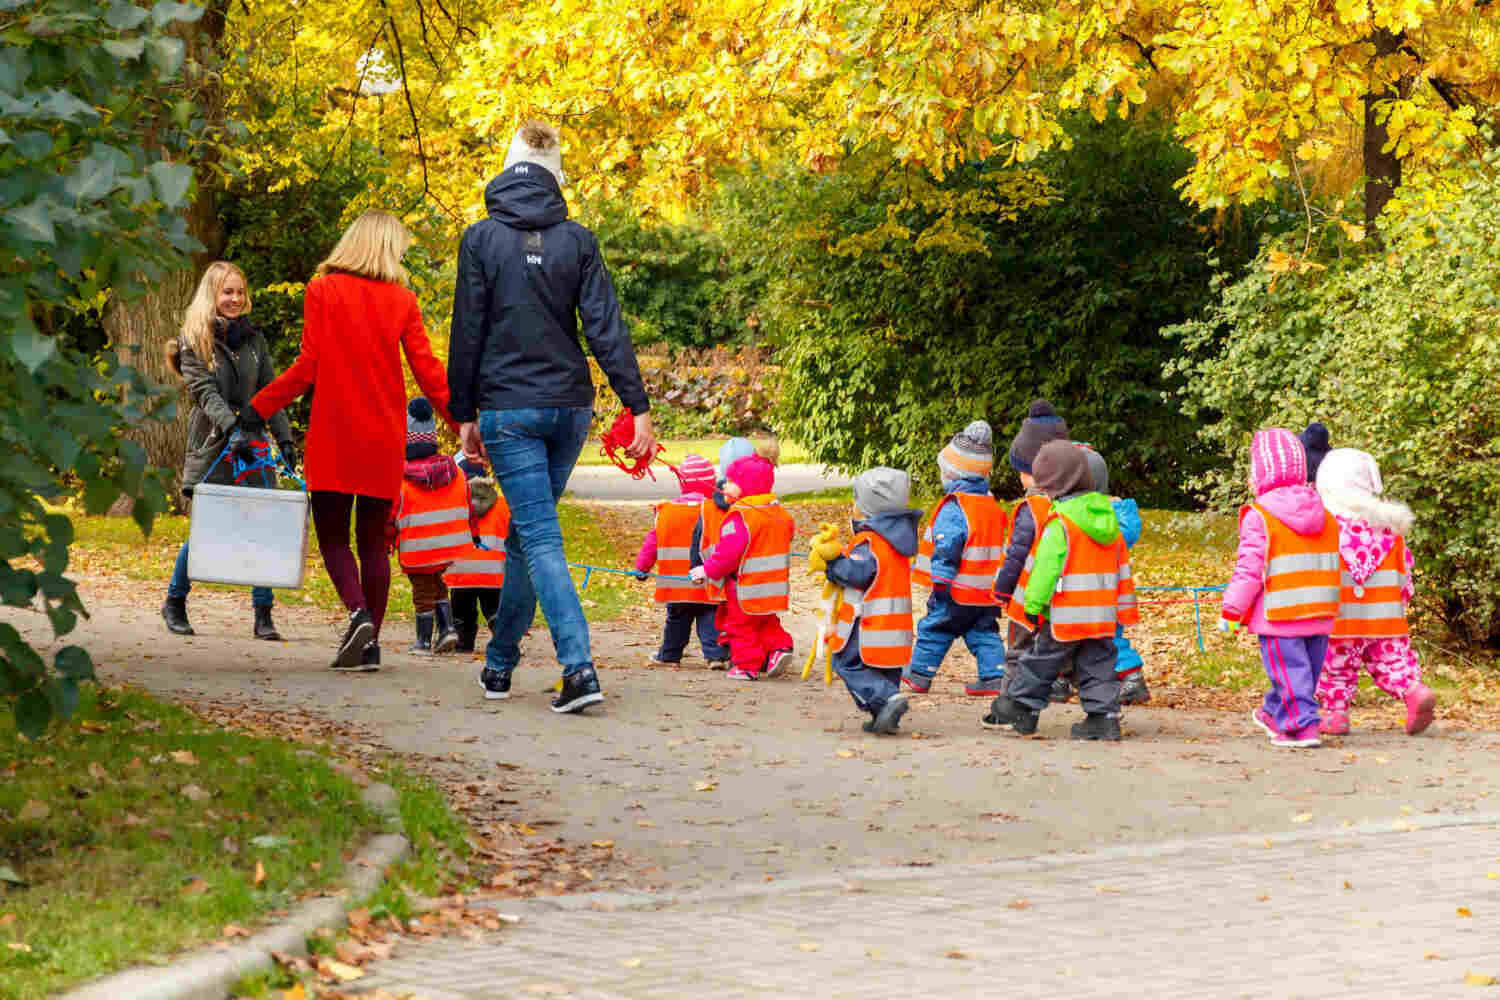 Choose a preschool which has adequate safety measures for kids